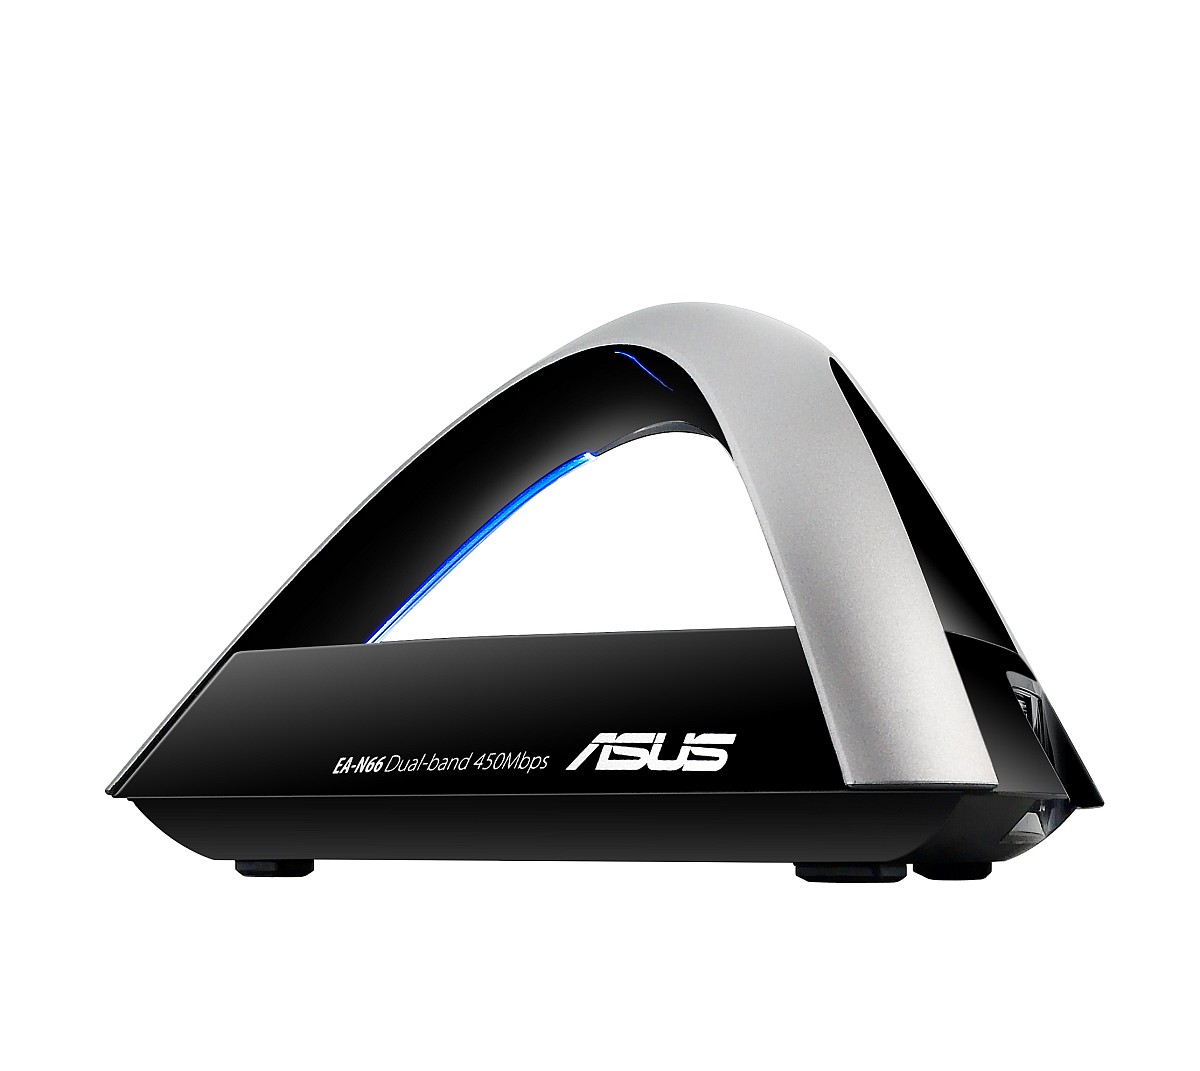 ASUS_EA-N66_Dual_Band__Wireless-N900_Ethernet_Adapter_side_view_2